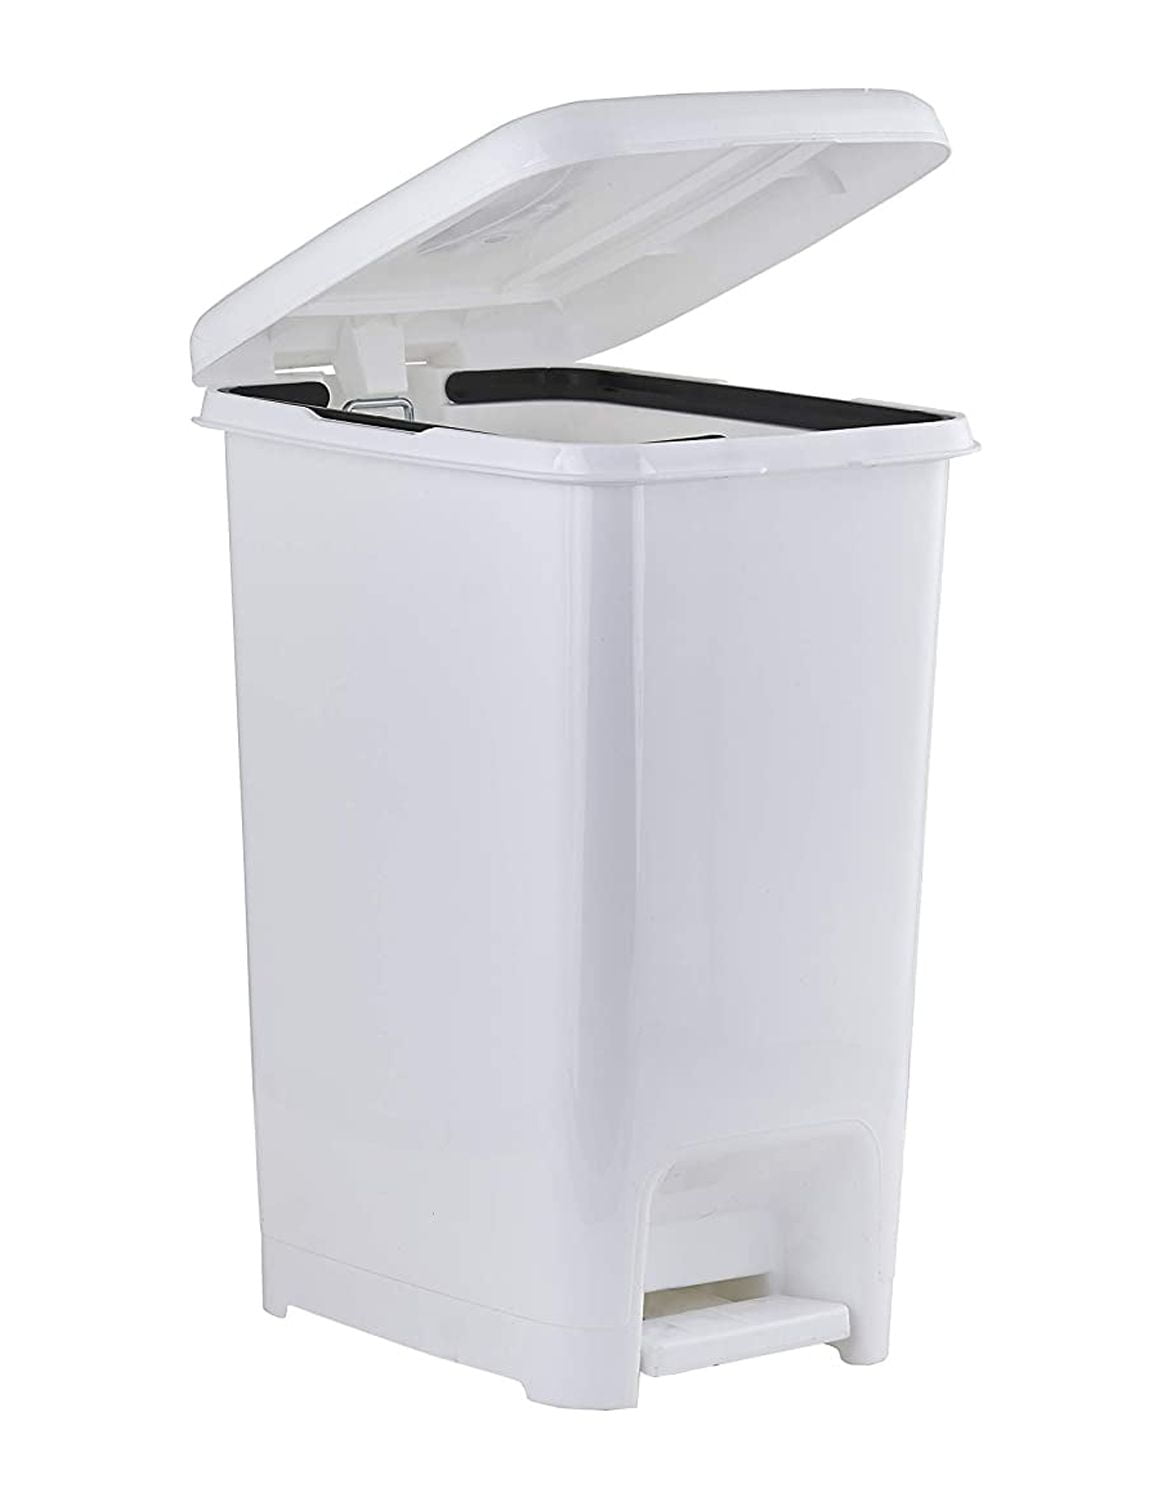 22.5 W x 11.5 D x 33.5 H Waste Container with Swing Lid, 23 Gallon, Space Saving Slim Profile Trash Can Storage